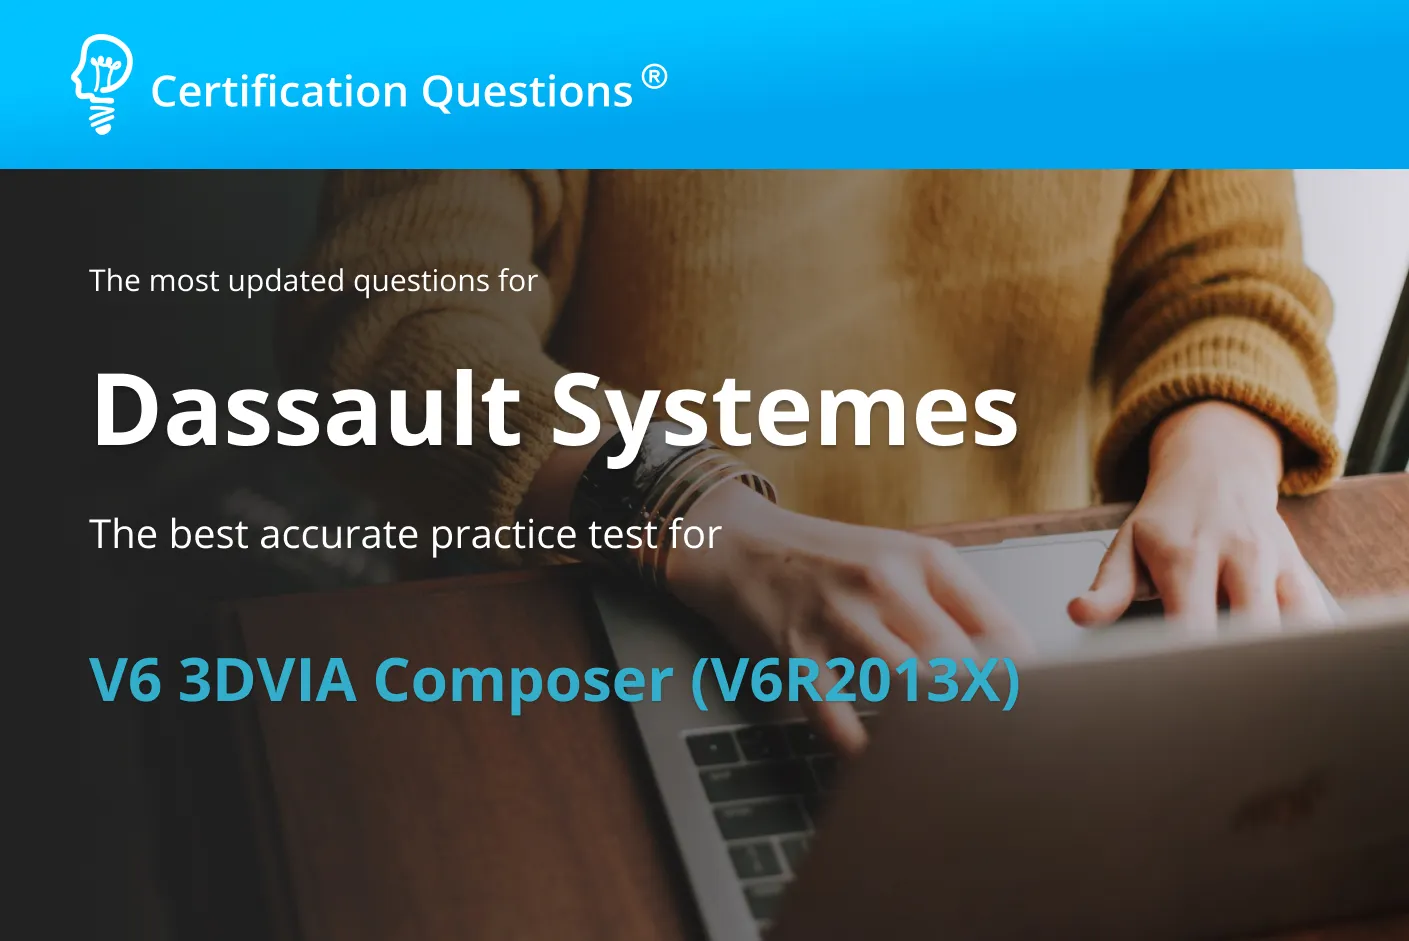 This image is related to V6 3DVIA Composer Practice test to prepare exam in the USA